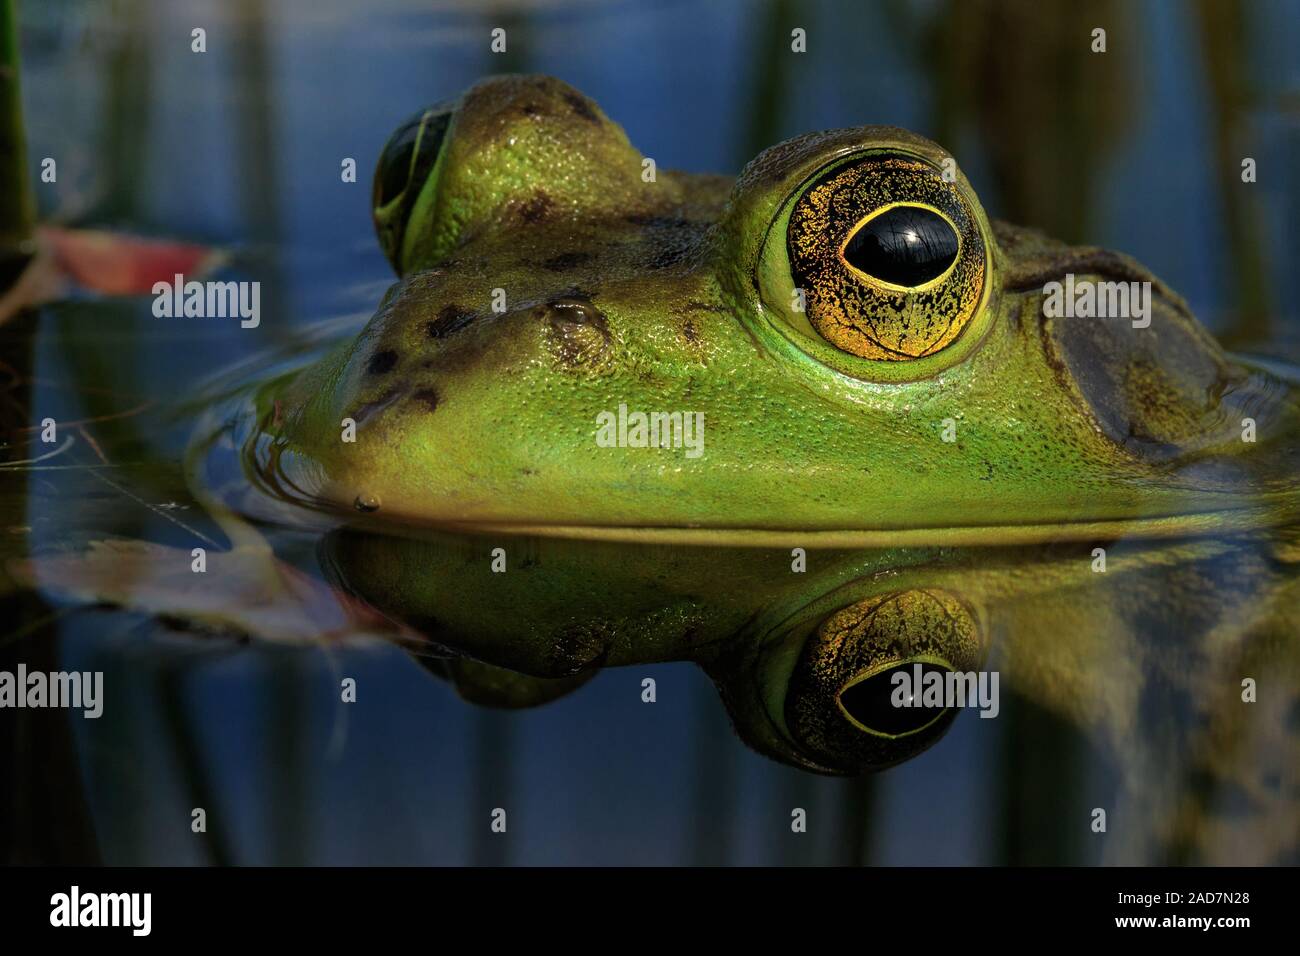 An American Bullfrog and its reflection. Stock Photo